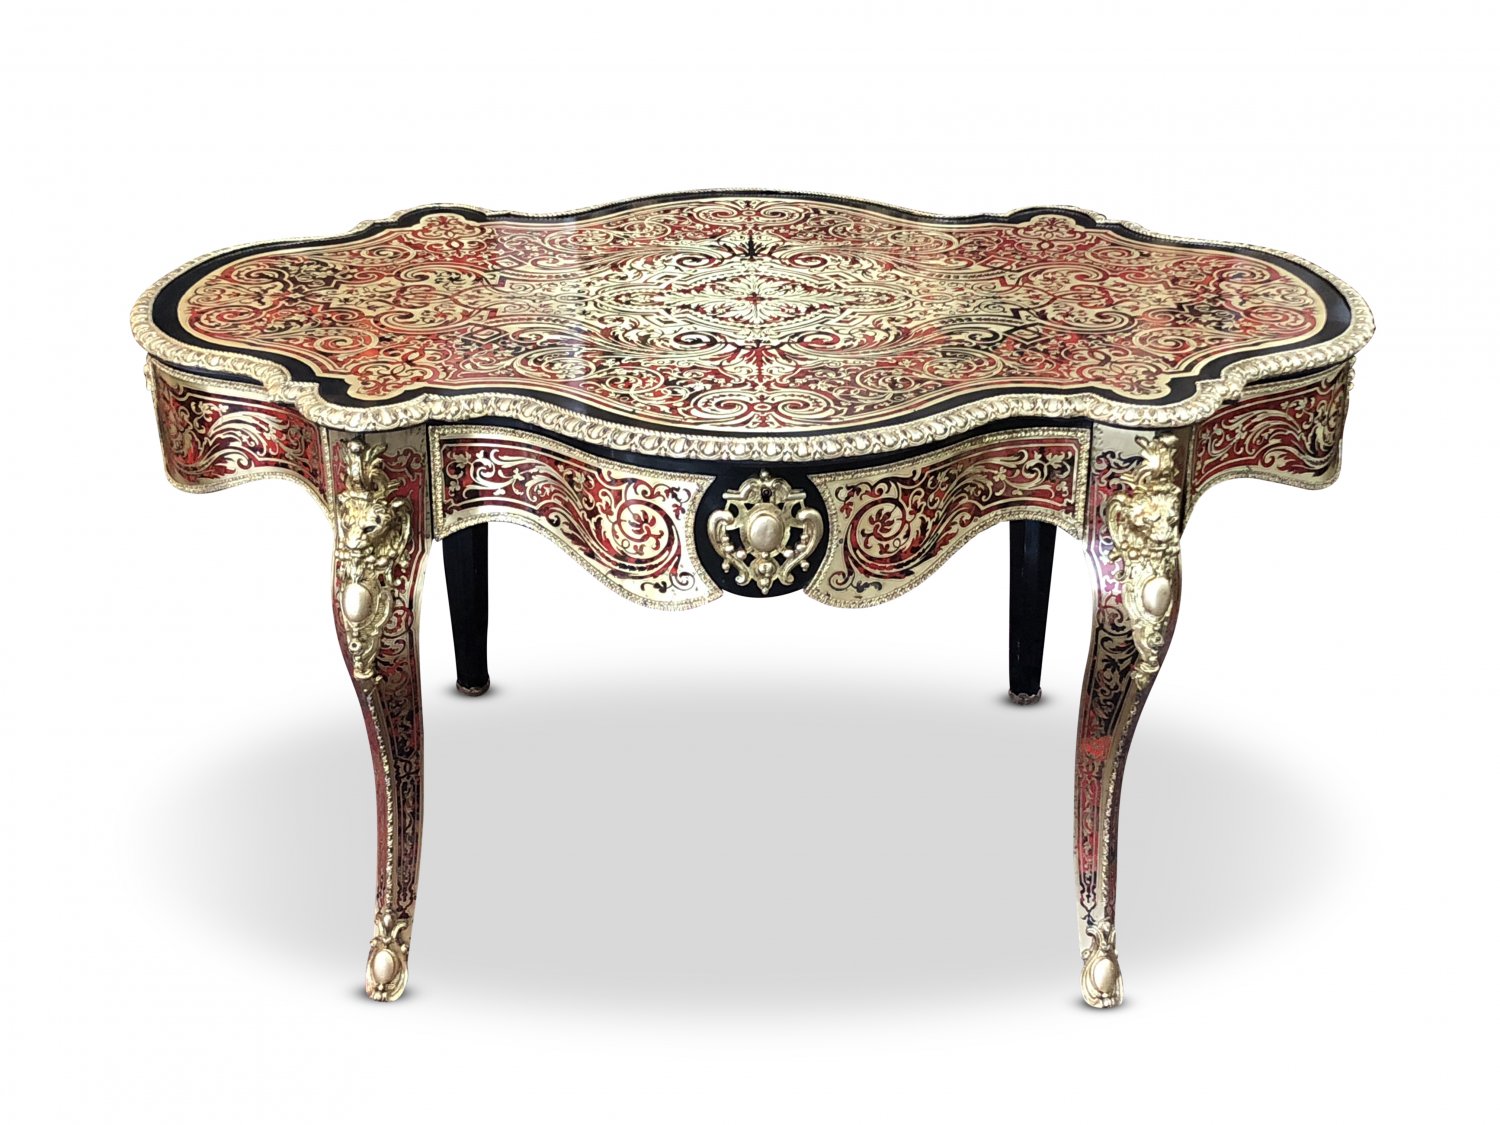 Outstanding 19th Century Ebonised Boulle Centre Table, with makers label under central drawer.